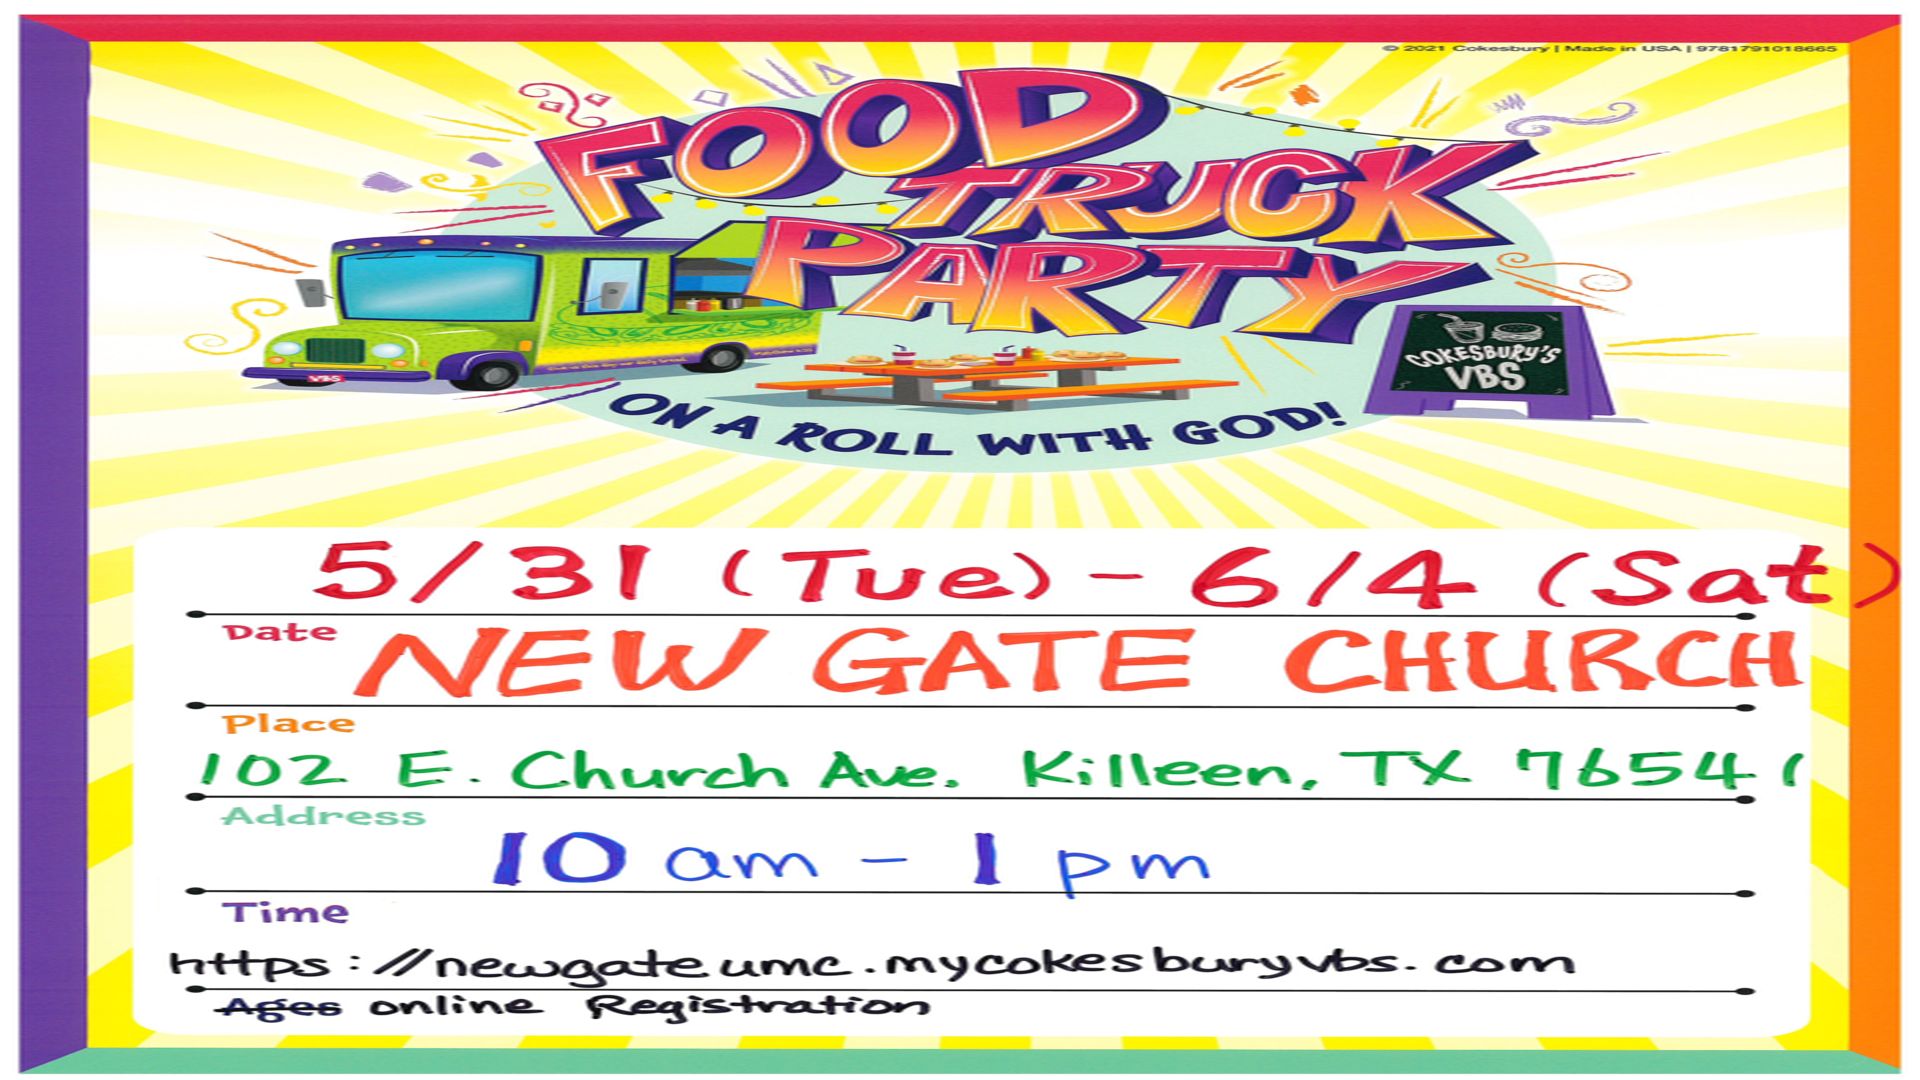 New Gate Church - Summer Vacation Bible School VBS "Food Truck Party" on May 31~June 4 (Killeen, TX), Killeen, Texas, United States